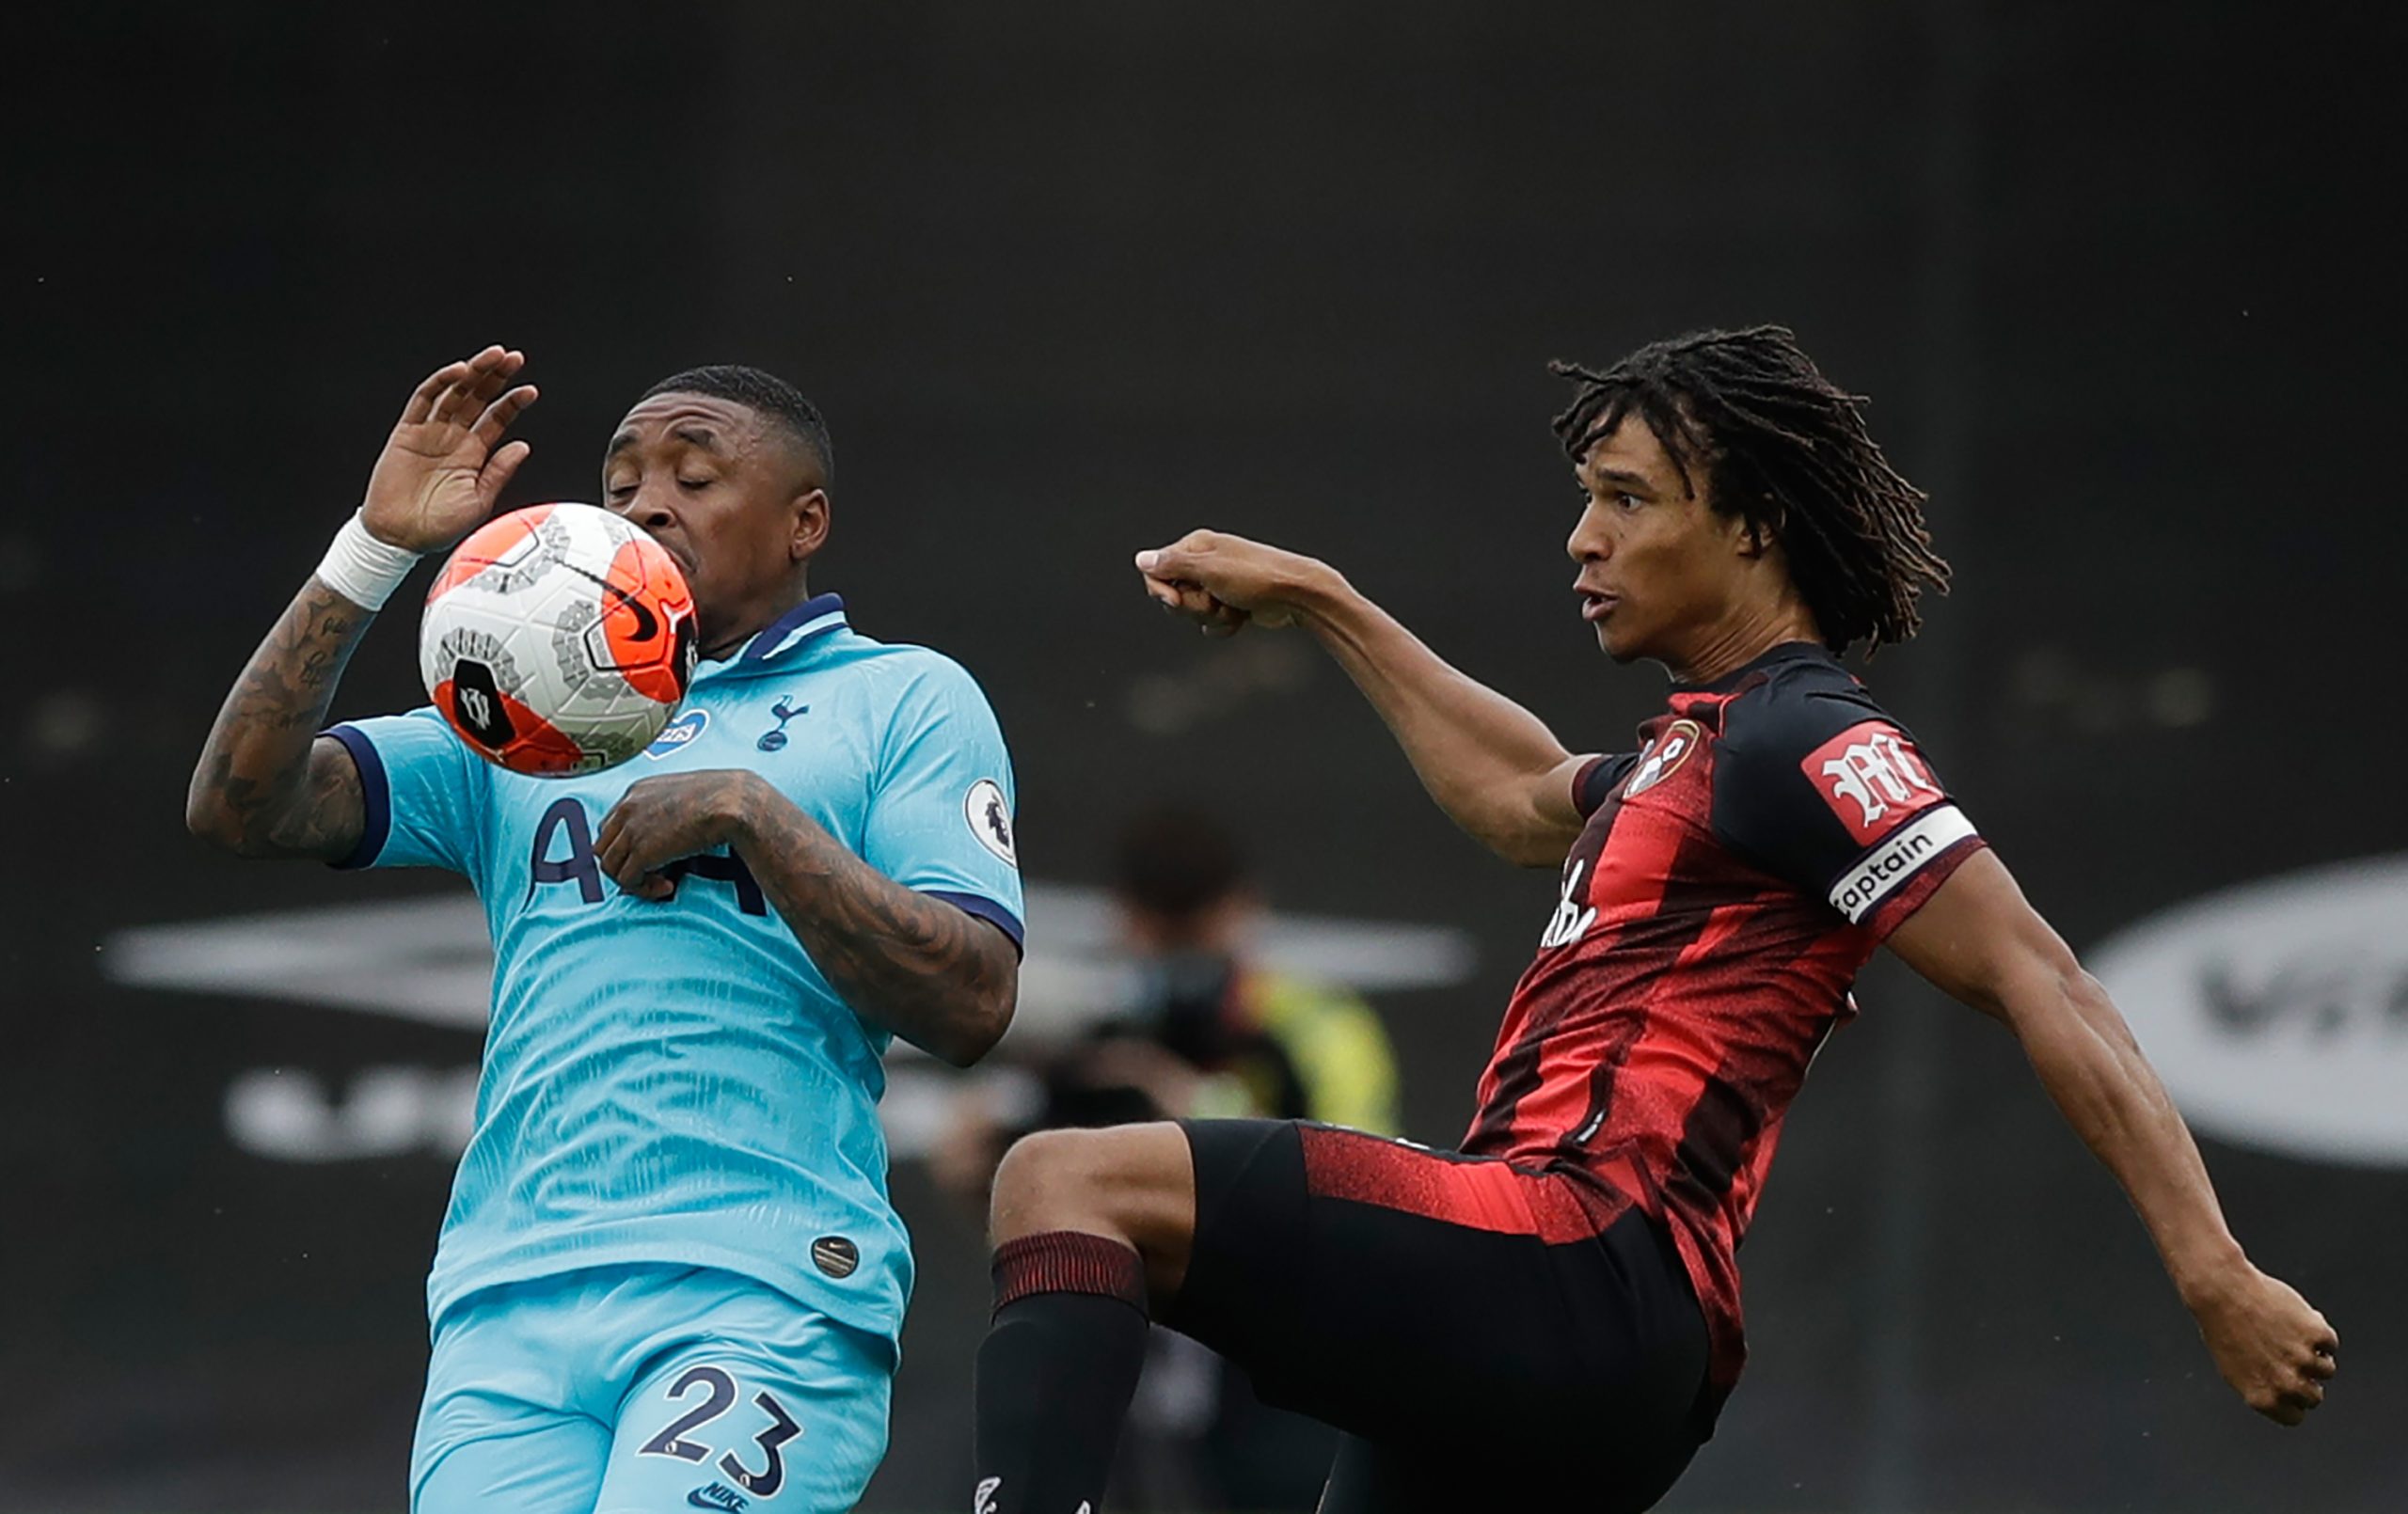 Nathan Ake agrees personal terms with Manchester City (Ake is seen in the photo)